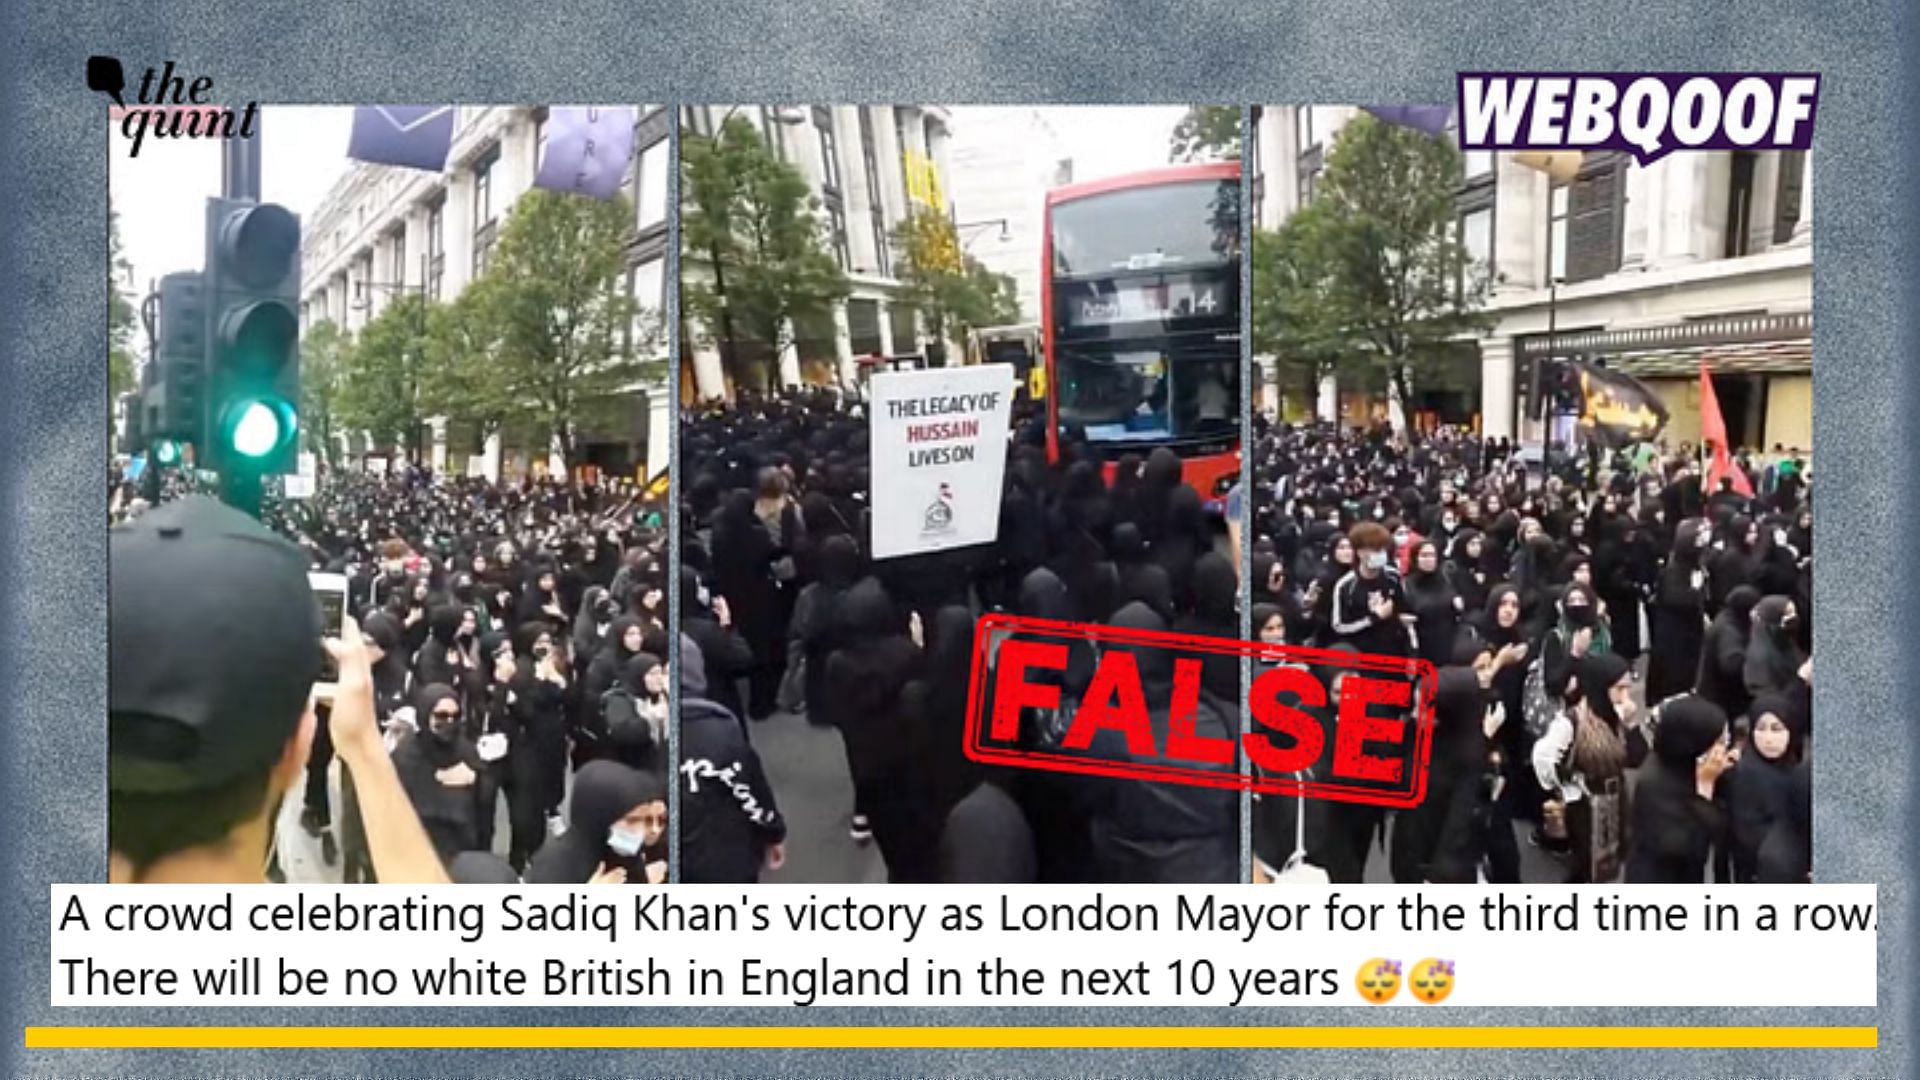 Old Video From London Falsely Linked to Sadiq Khan Being Elected as Mayor